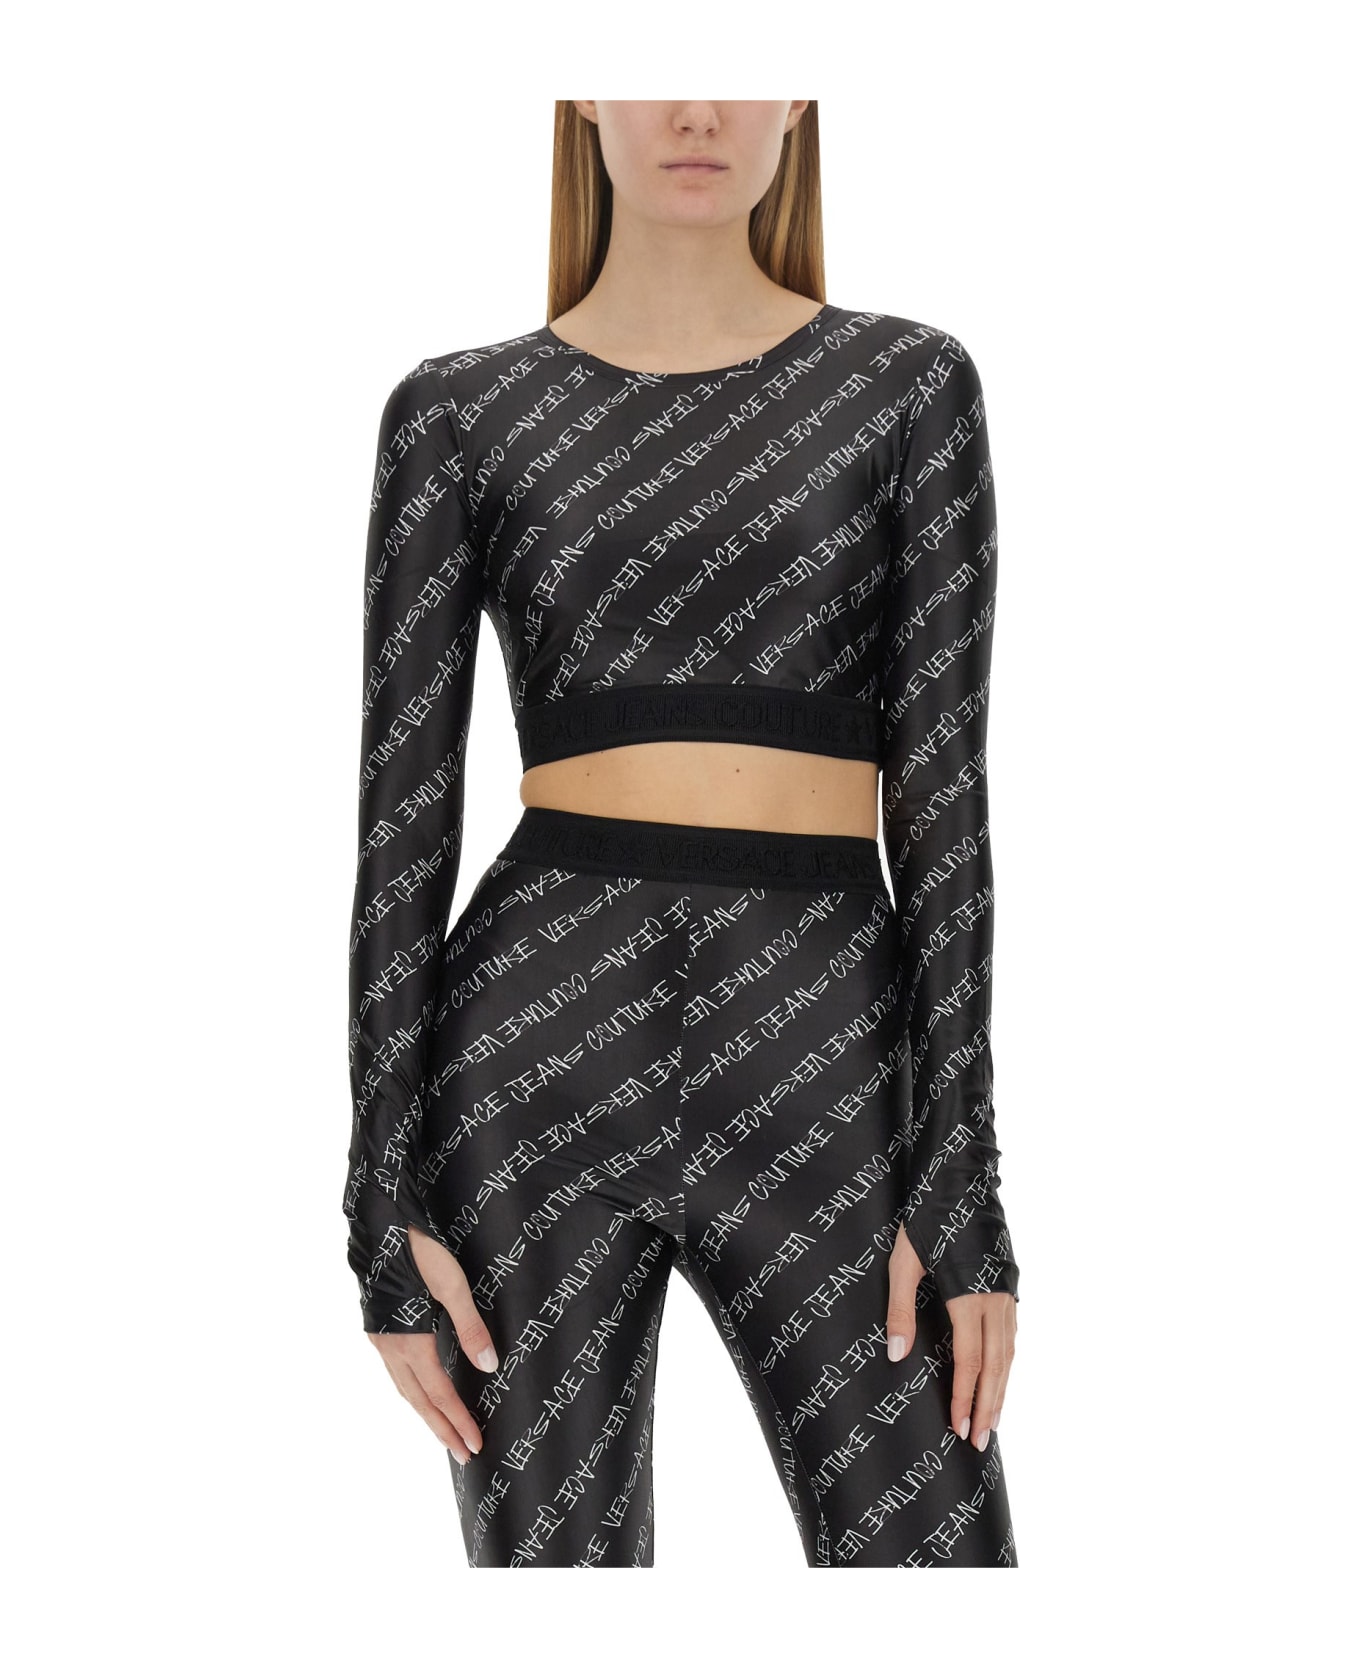 Versace Jeans Couture Signature Cropped Top - NERO